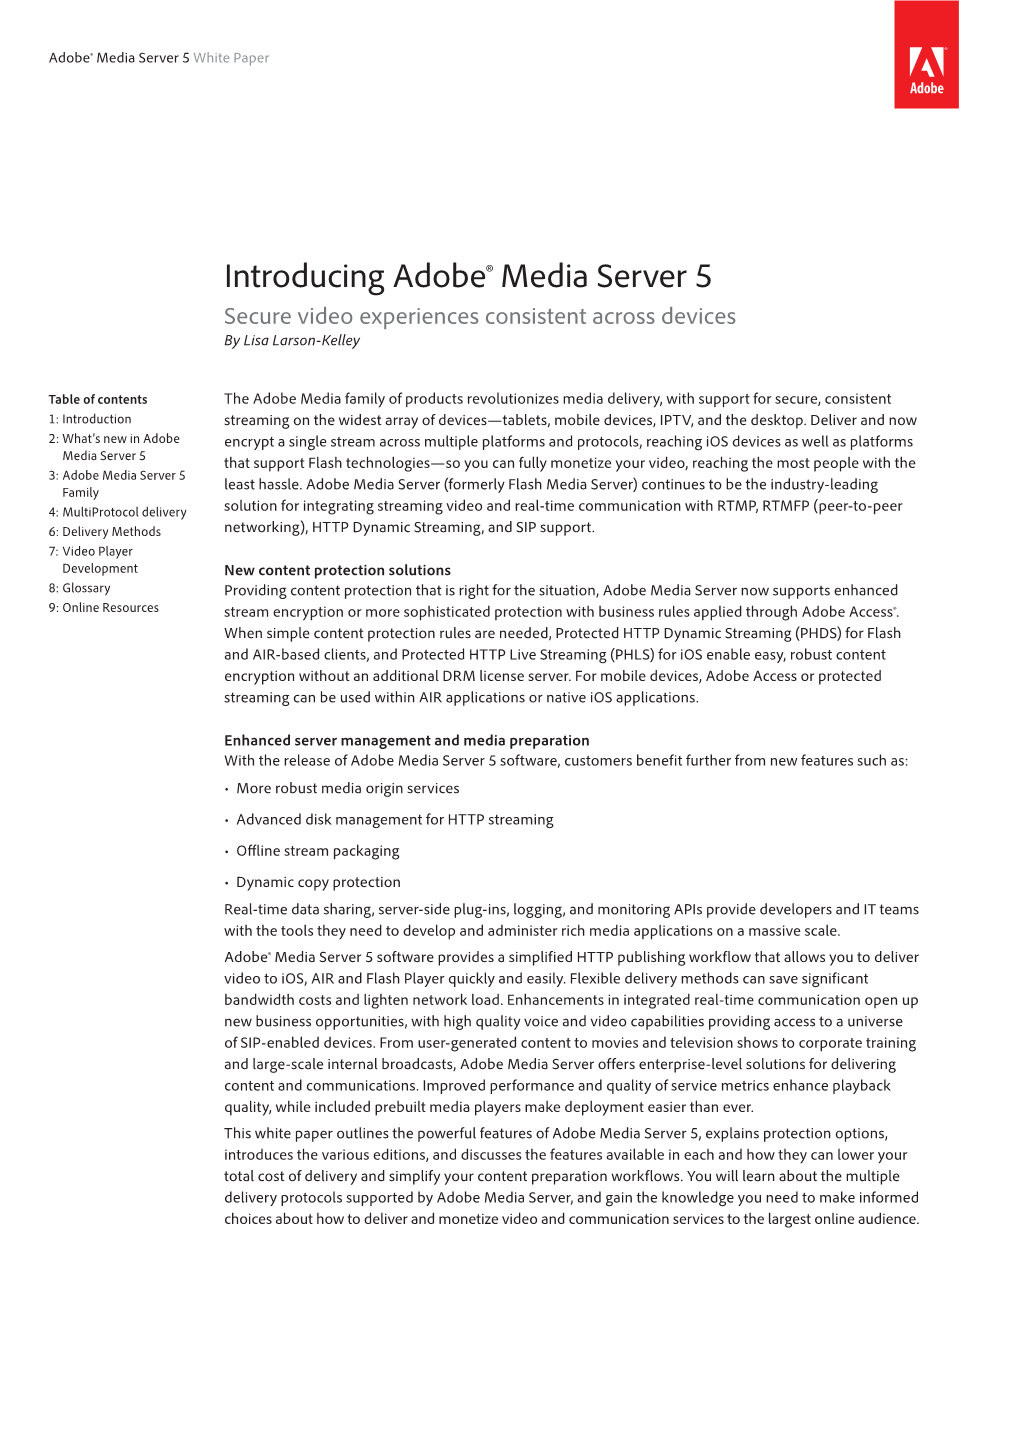 Introducing Adobe® Media Server 5 Secure Video Experiences Consistent Across Devices by Lisa Larson-Kelley